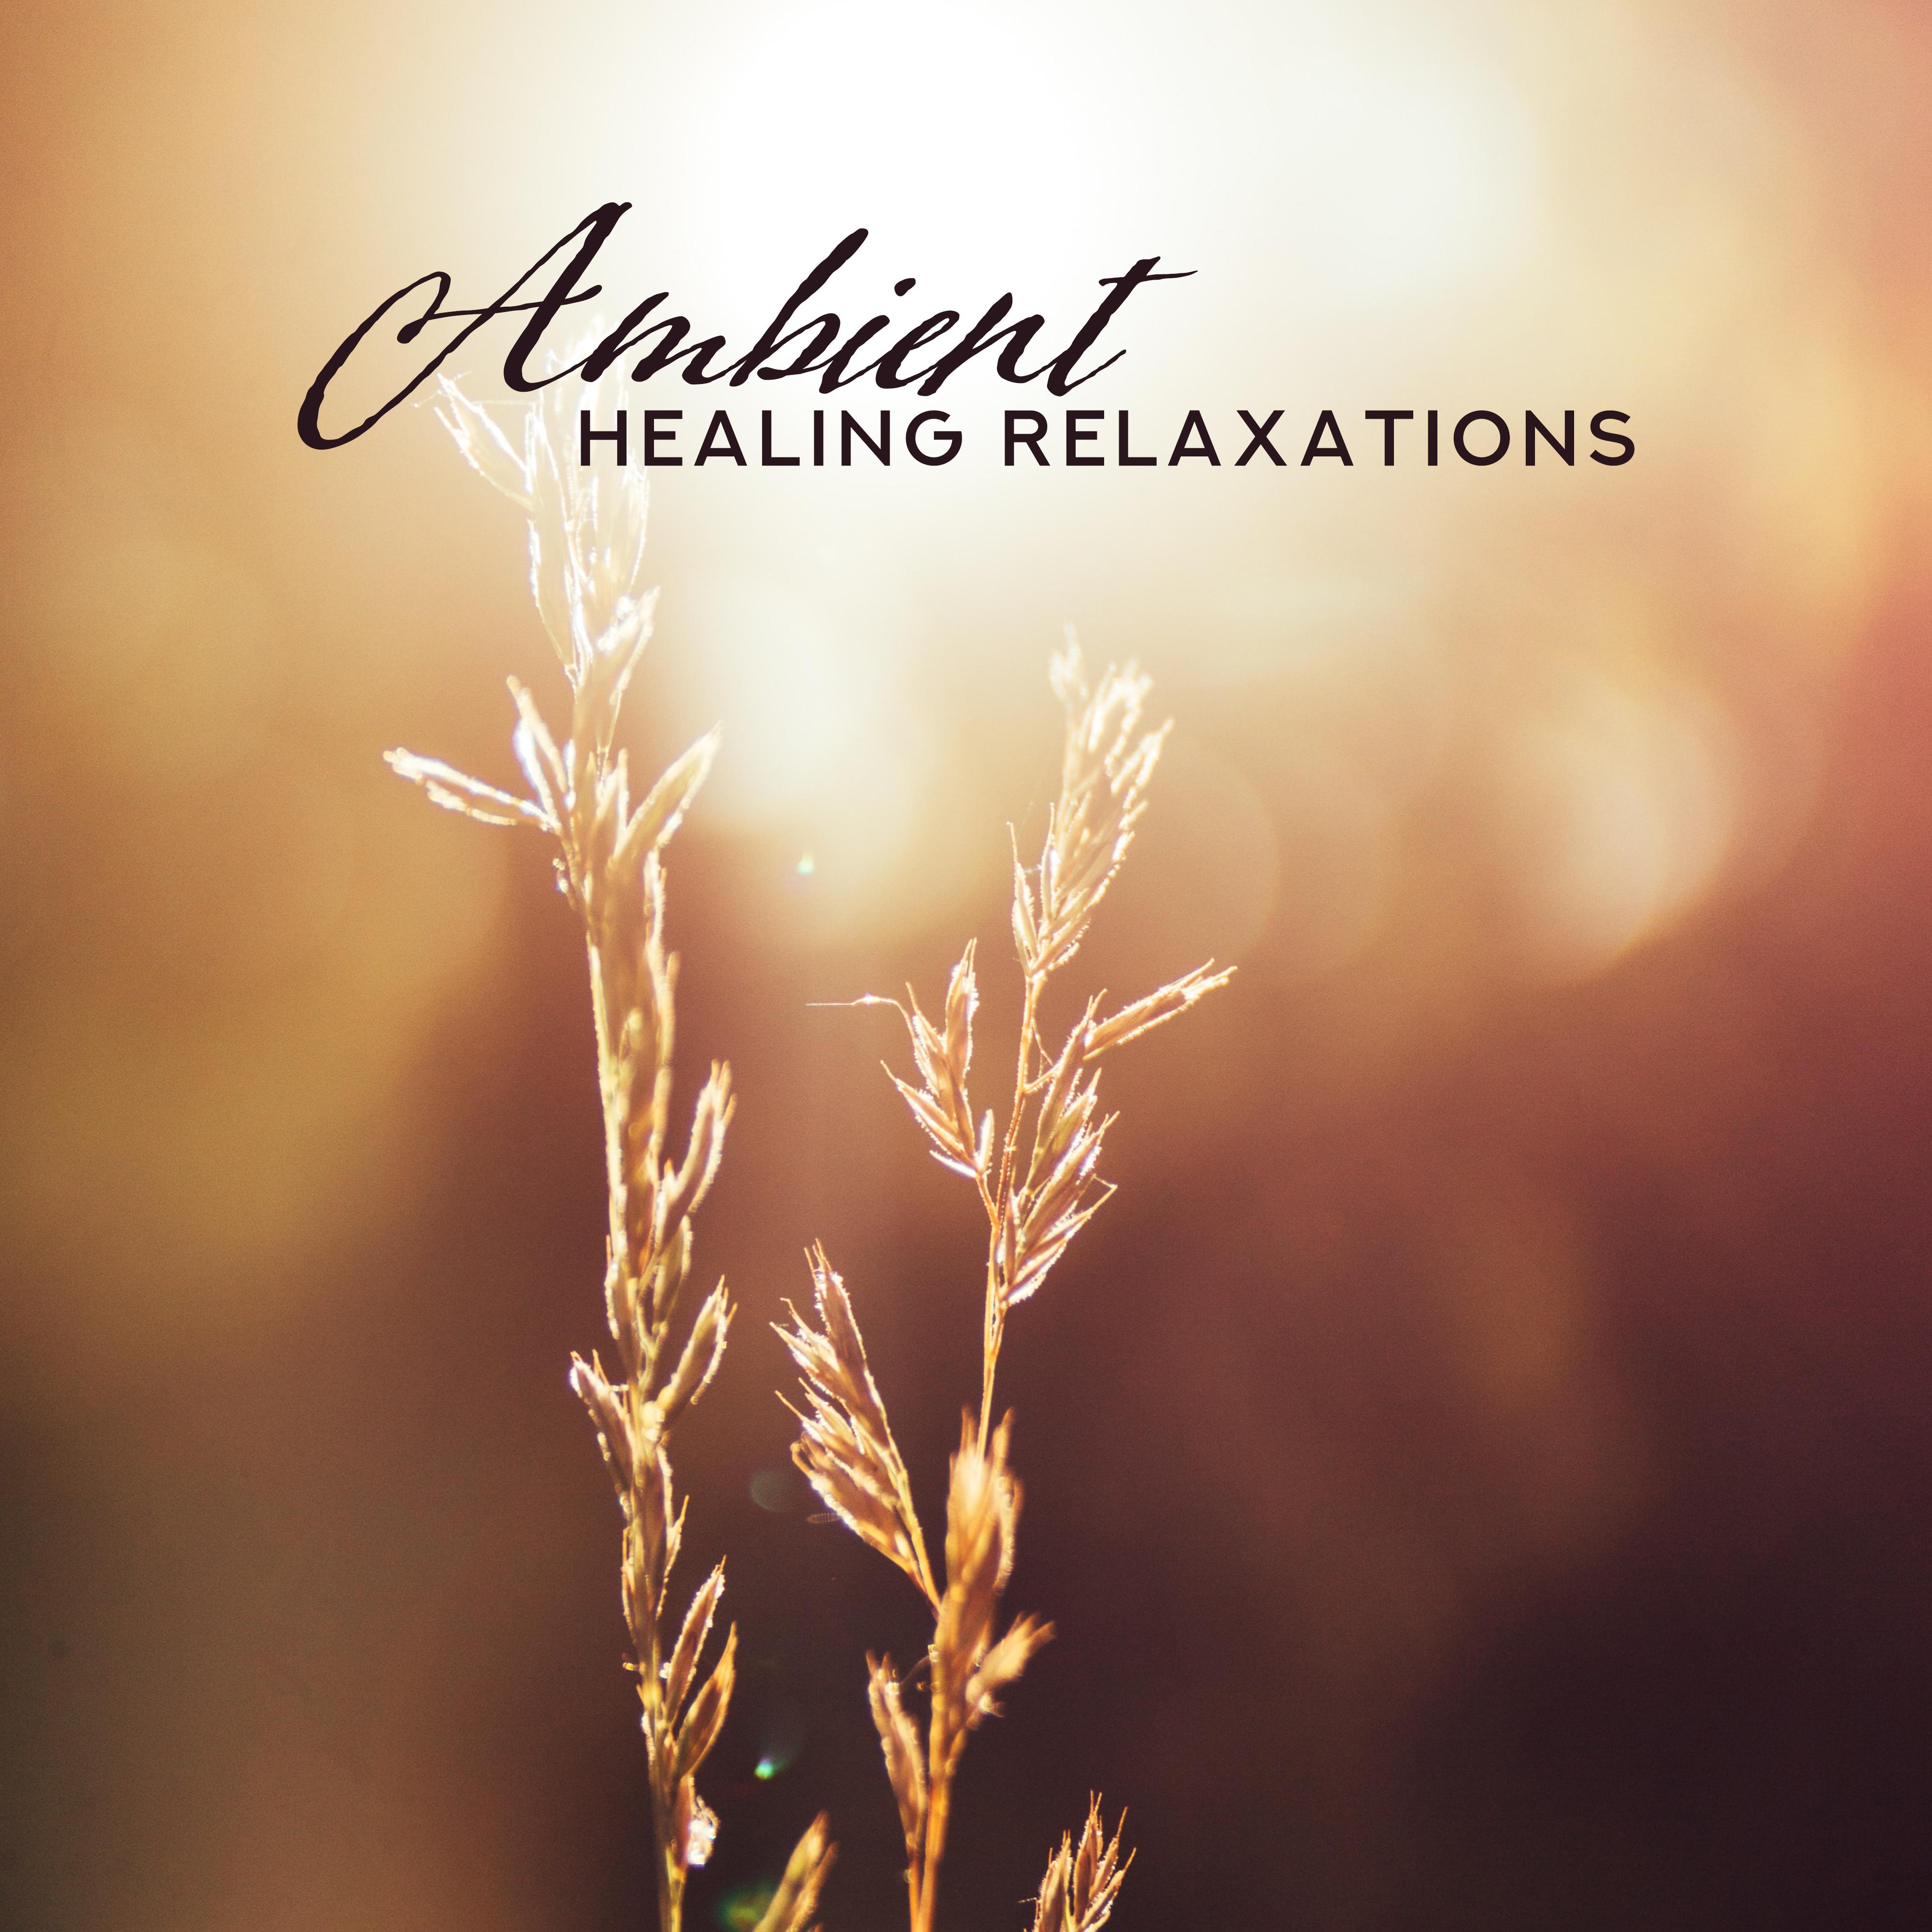 Ambient Healing Relaxations – Selection of Top 2019 New Age Deep Music for Relaxation & Meditation, Therapy Songs for Calm Down, Stress Free, Rest, Afternoon Nap